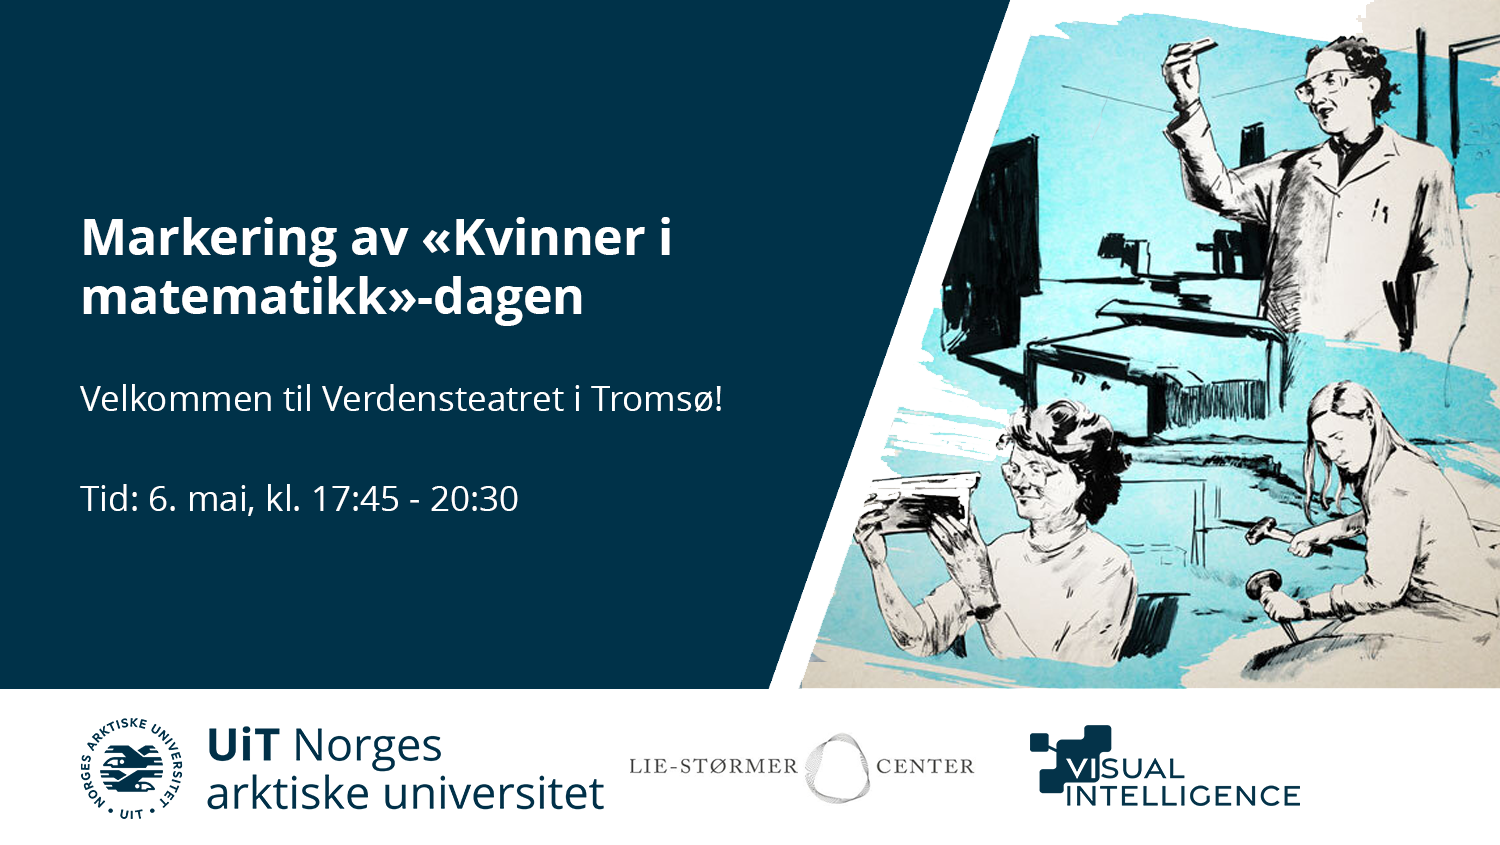 An event banner with information about the local Women in Mathematics Day in Tromsø, Norway